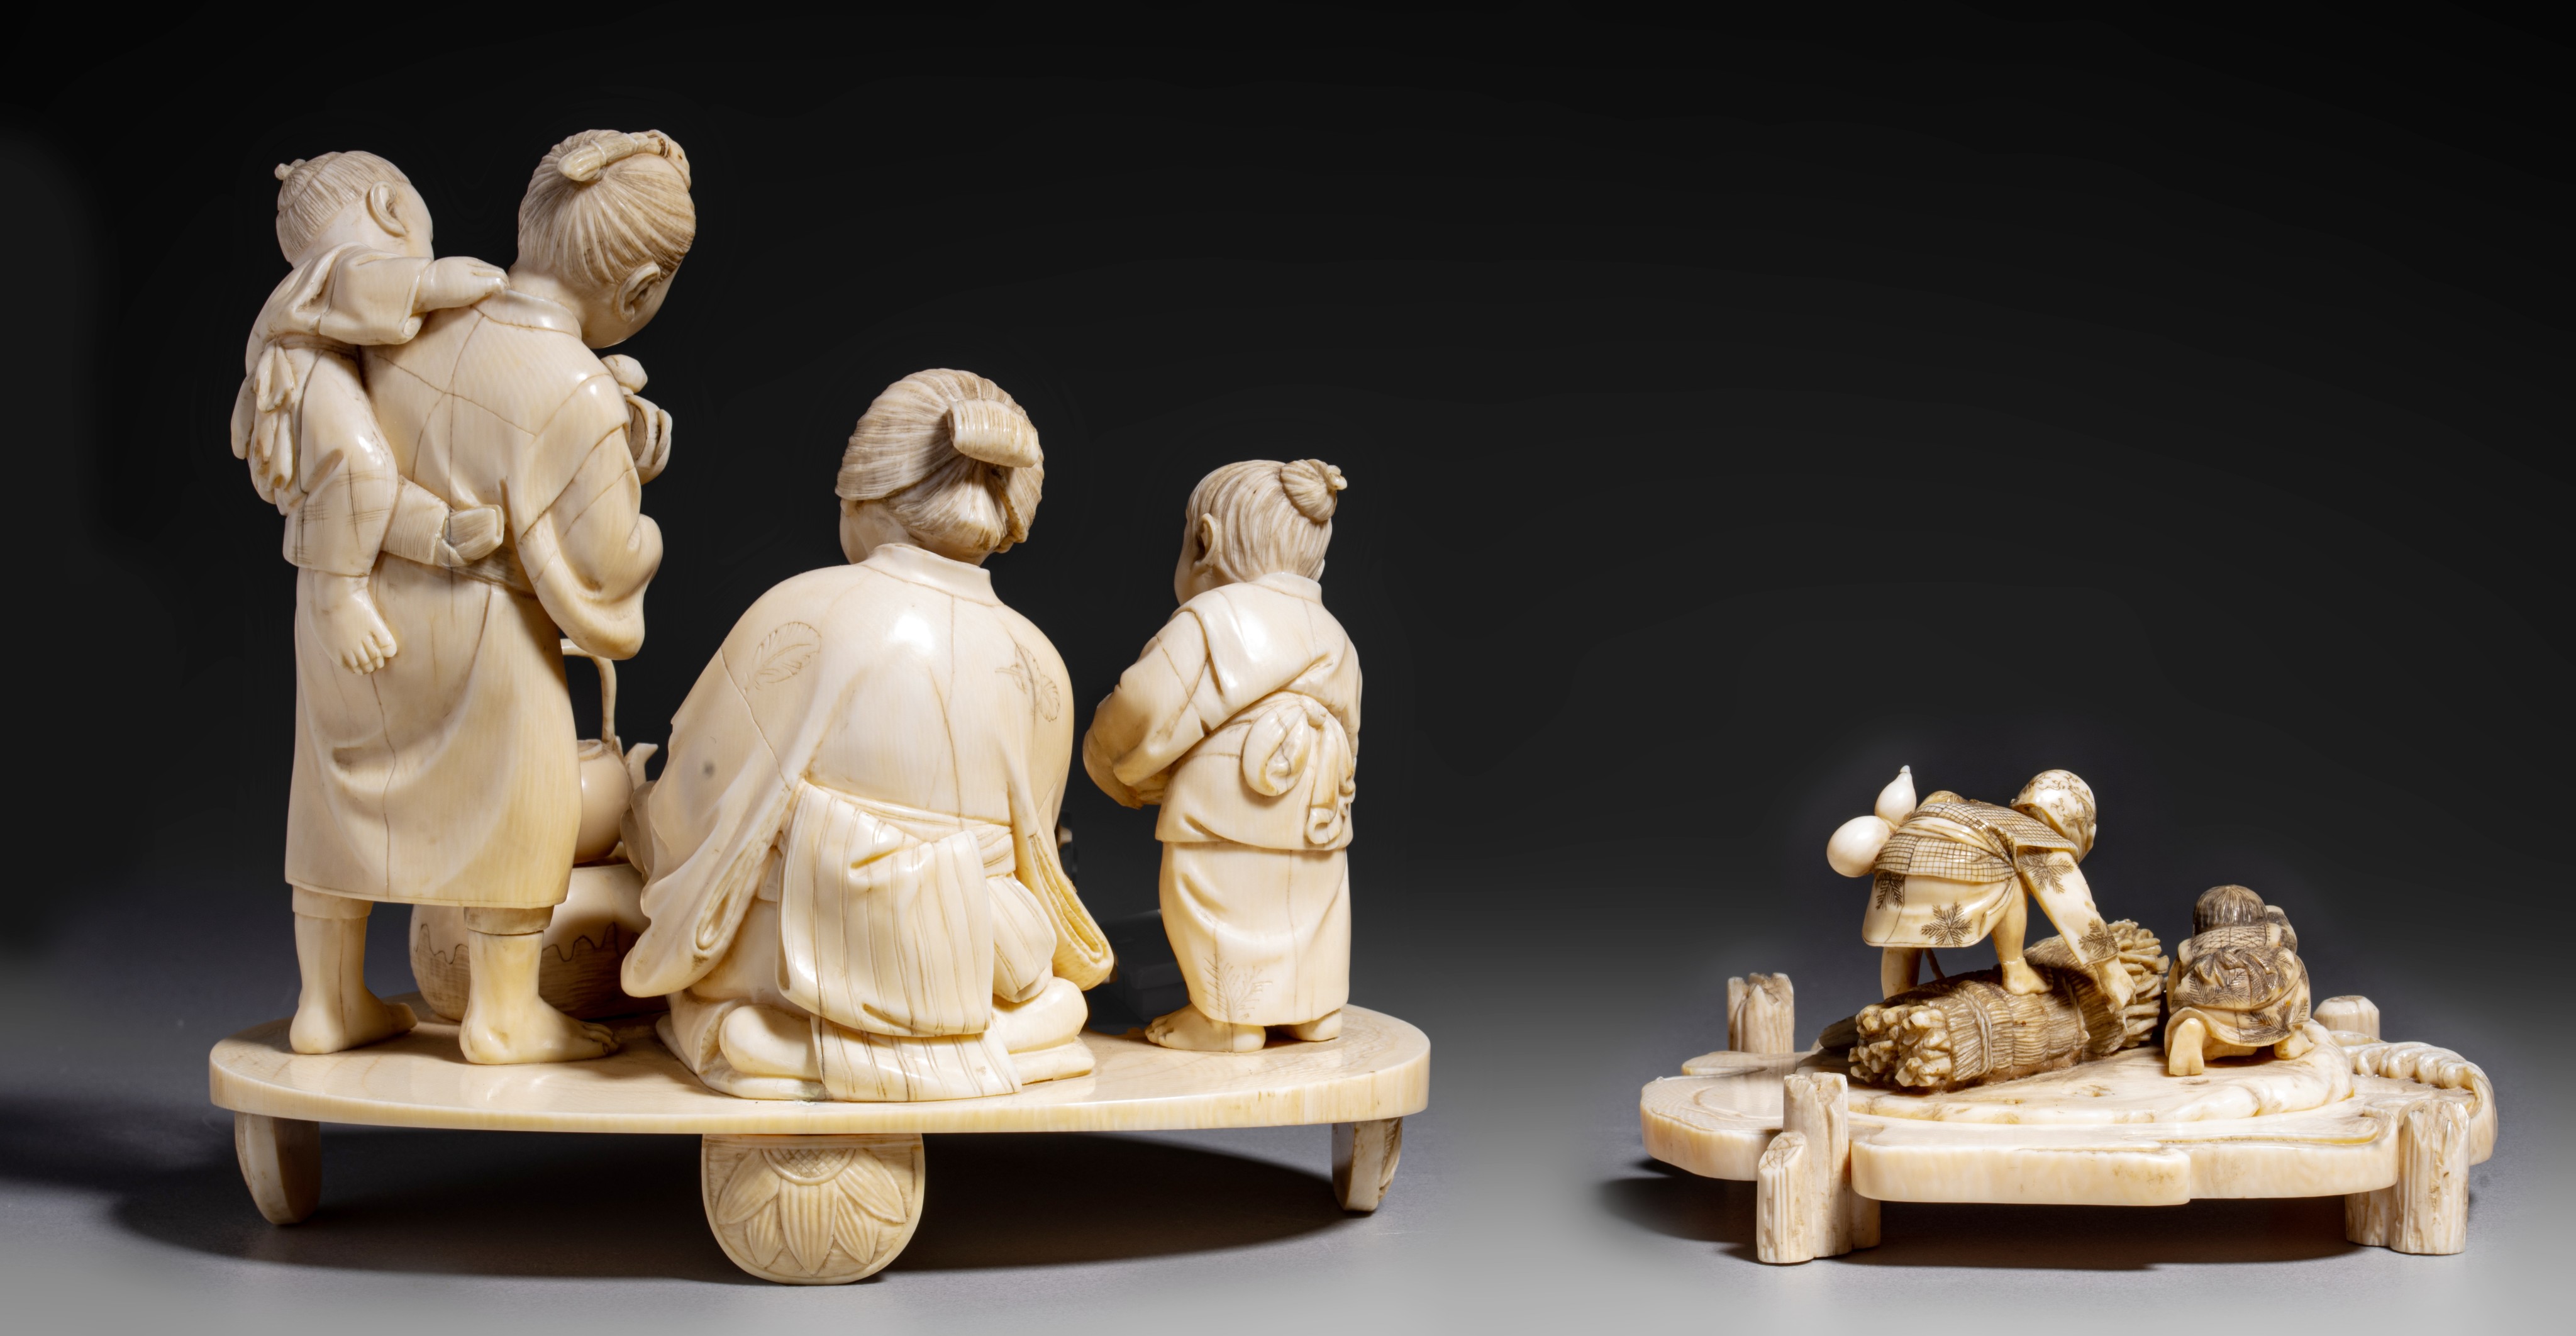 Two Japanese ivory animated scenes, H 12,4 cm - H 5,2 cm, 451g - 118g (+) - Image 3 of 7